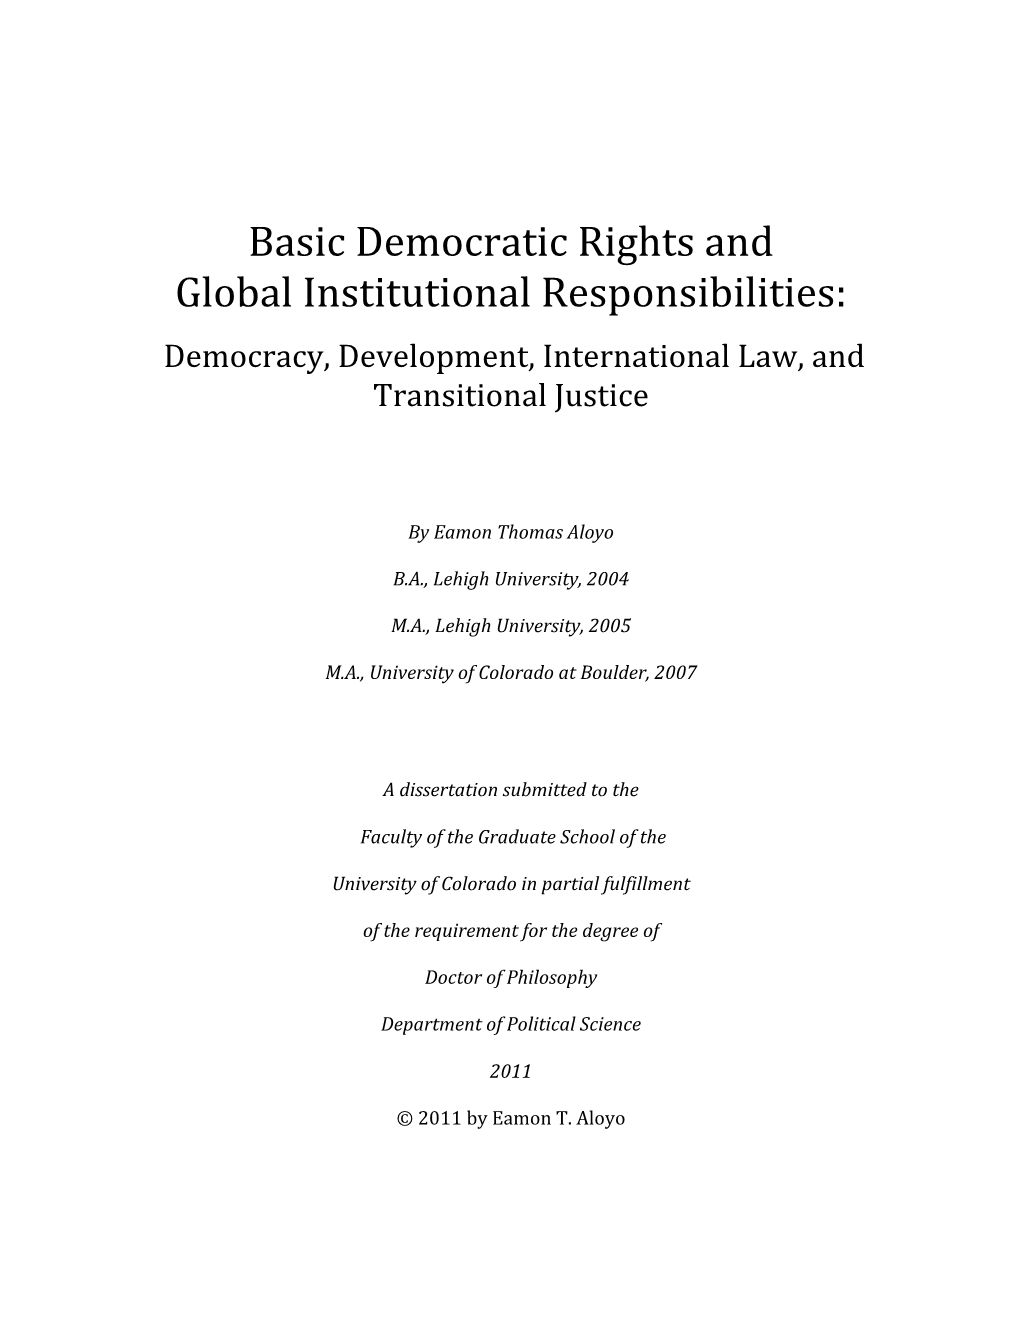 Basic Democratic Rights and Global Institutional Responsibilities